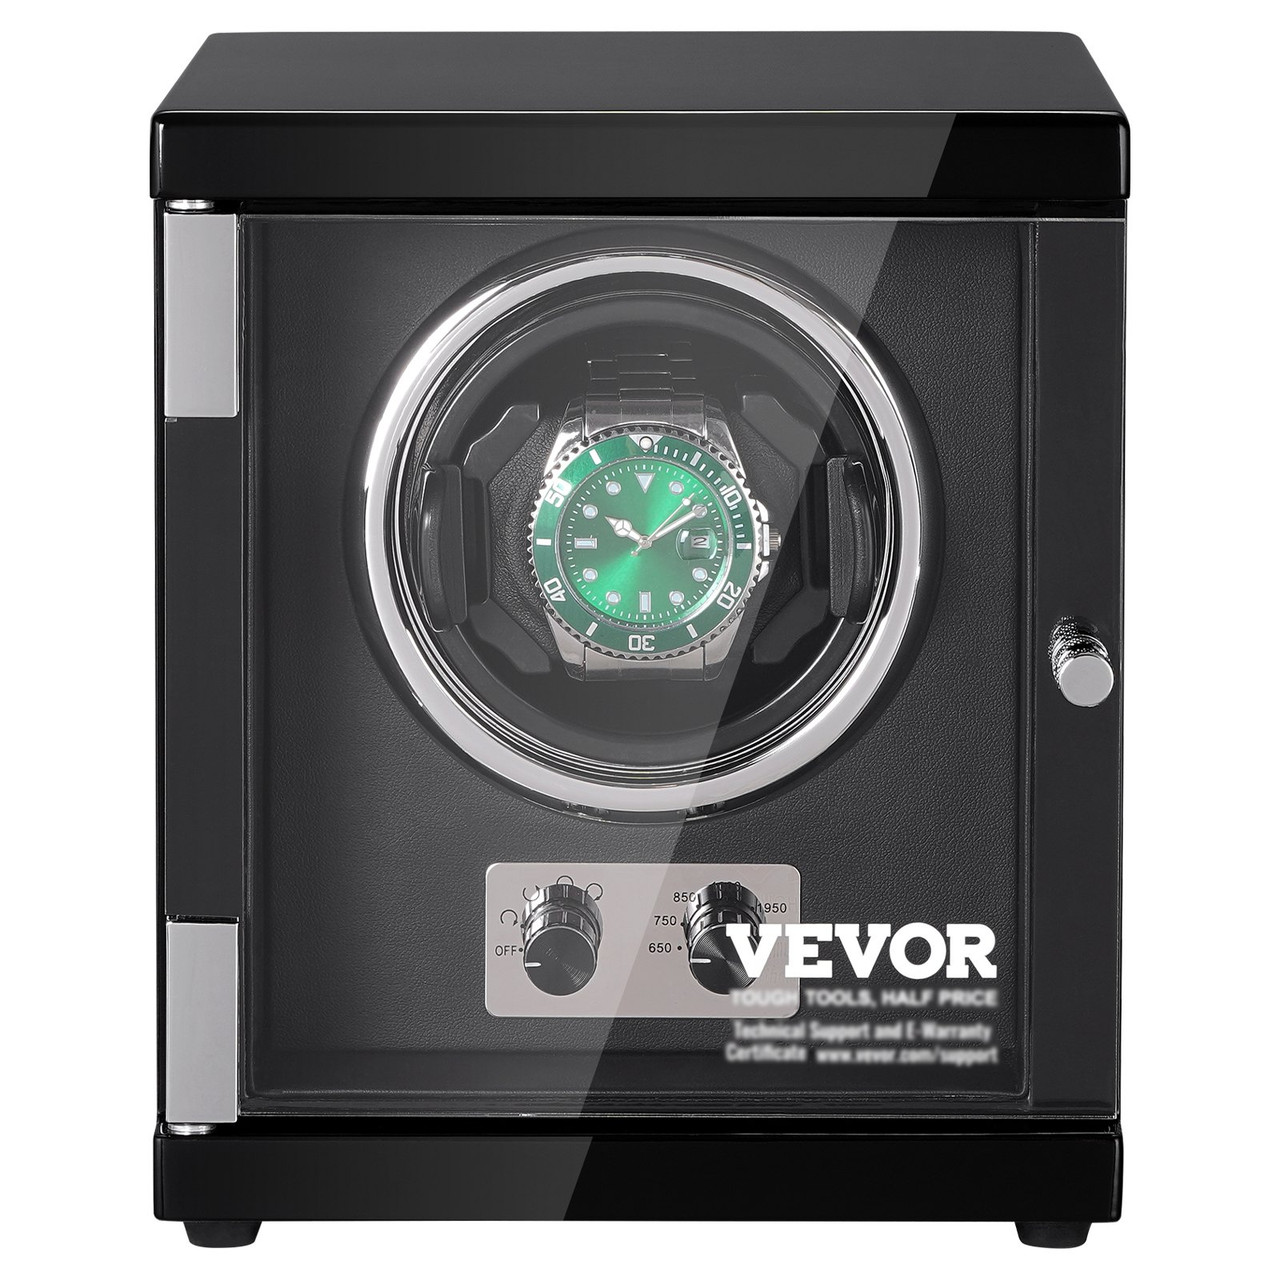 VEVOR Watch Winder, Single Watch Winder for Men's and Women's Automatic Watch, with Super Quiet Japanese Mabuchi Motor, Blue LED Light and Adapter, High-Density Board Shell and Black PU